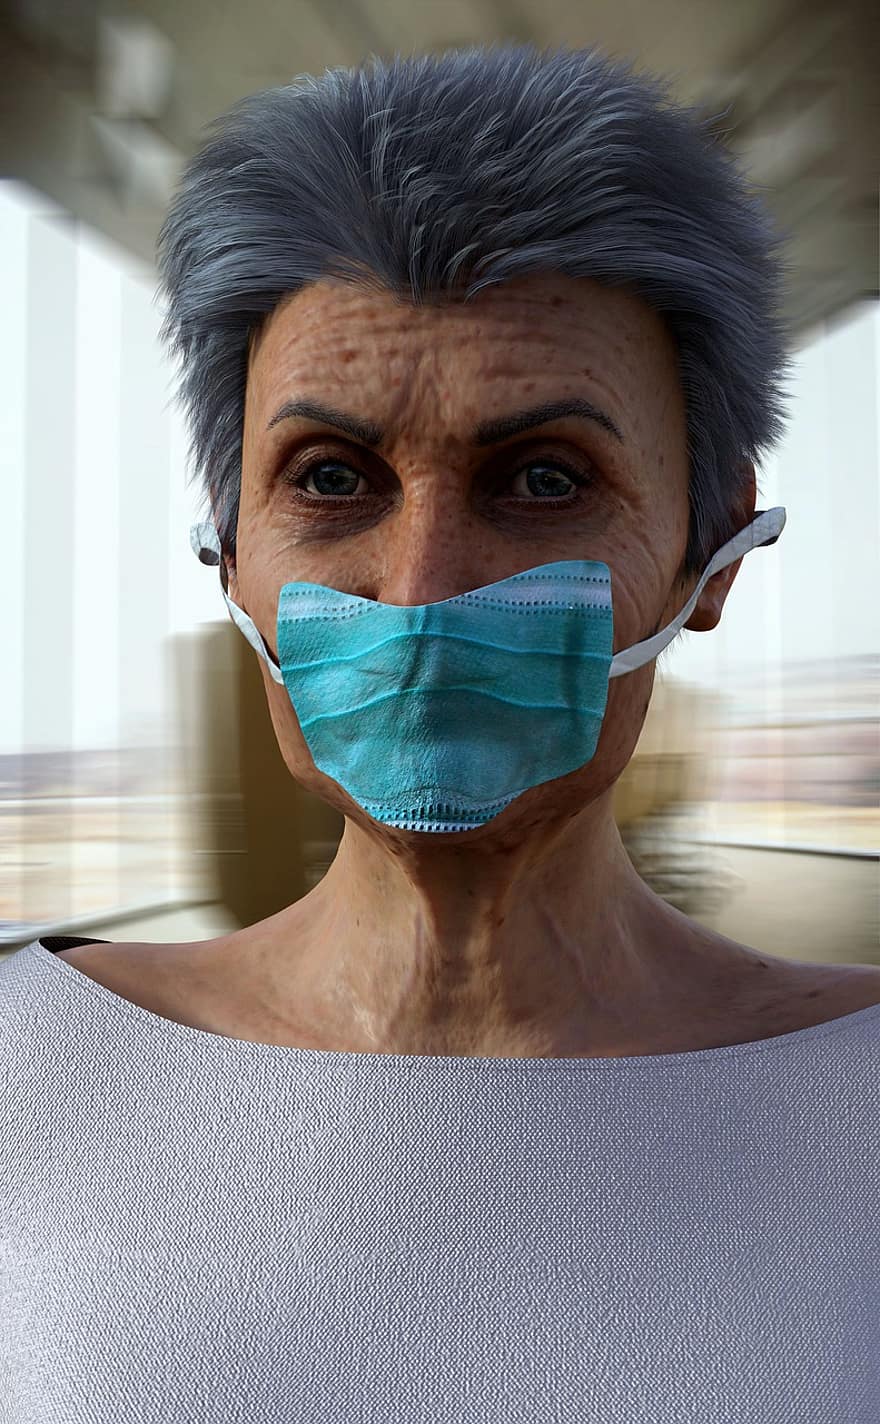 Virus, Protection, Coronavirus, Woman, Face, Mask, Mouth, Breathing, Pandemic, Outbreak, Covid-19